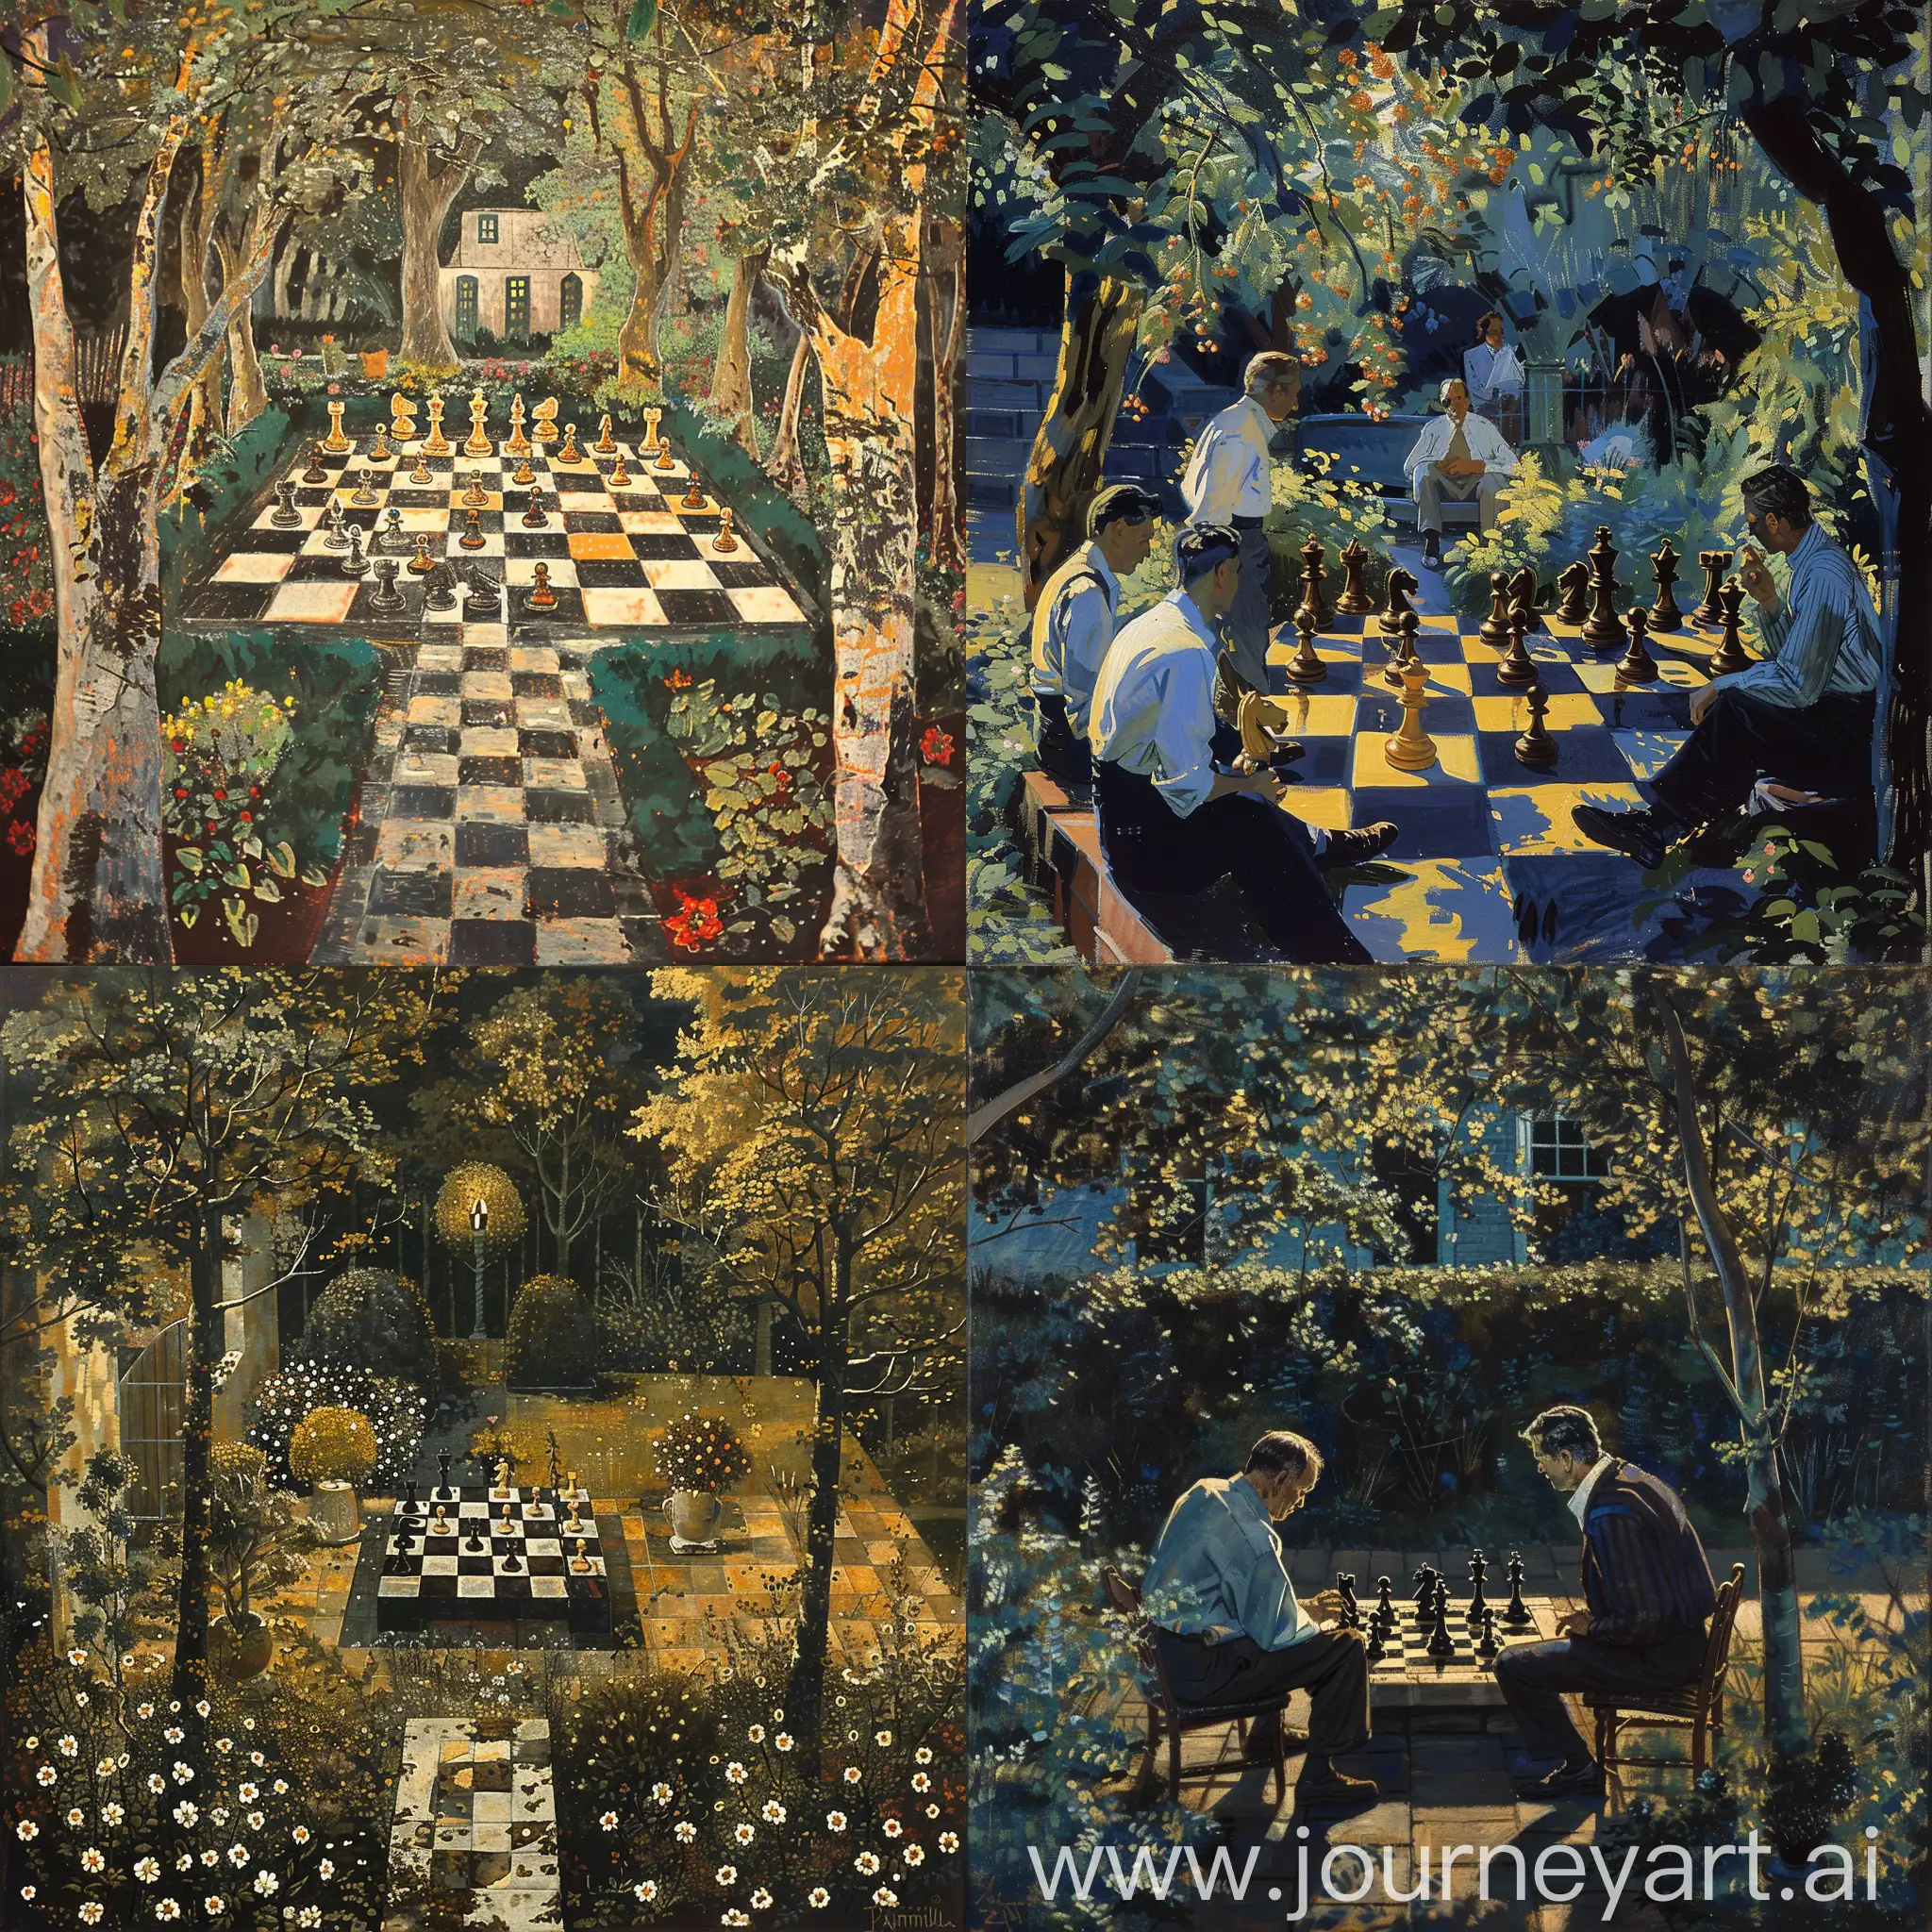 draw a chess game in the mysterious garden in style of tarcila do amaral, 1920

draw a chess game in the mysterious garden in style of grant wood and tarcila do amaral, 1930

draw a chess game in the mysterious garden in style of Edward Hopper and tarcila do amaral, 1940